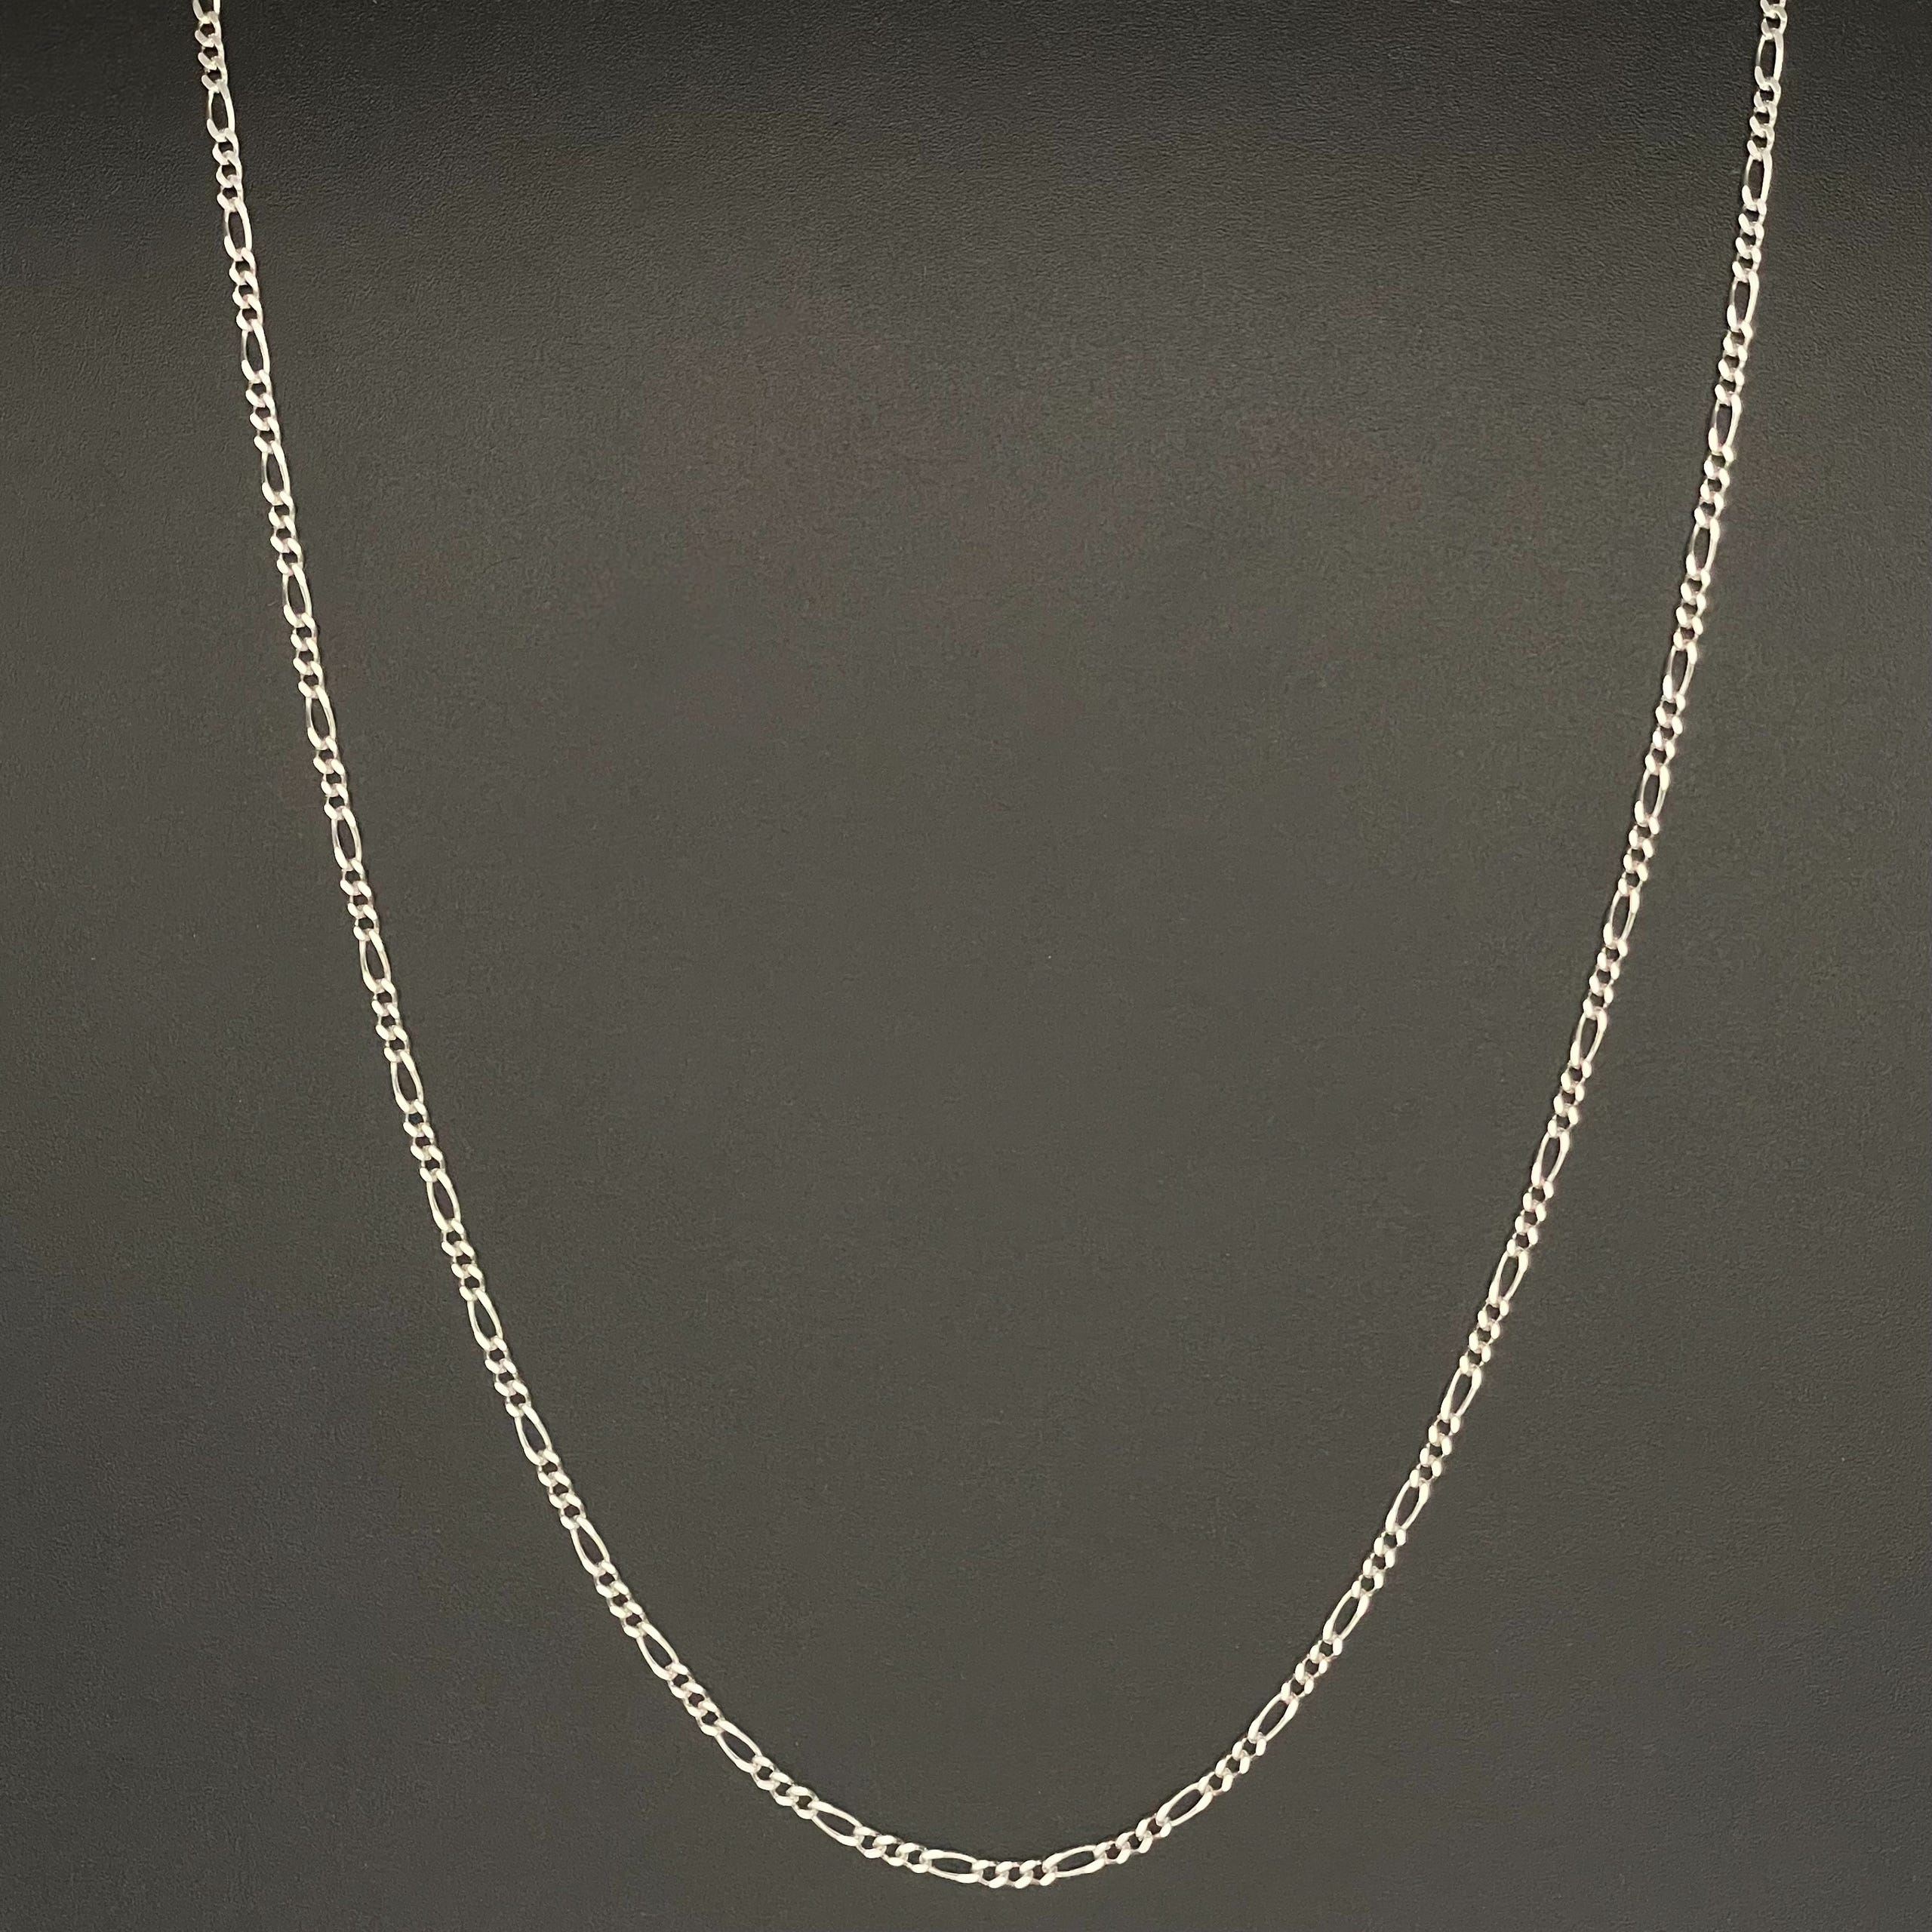 Silver chain necklace on a black background.